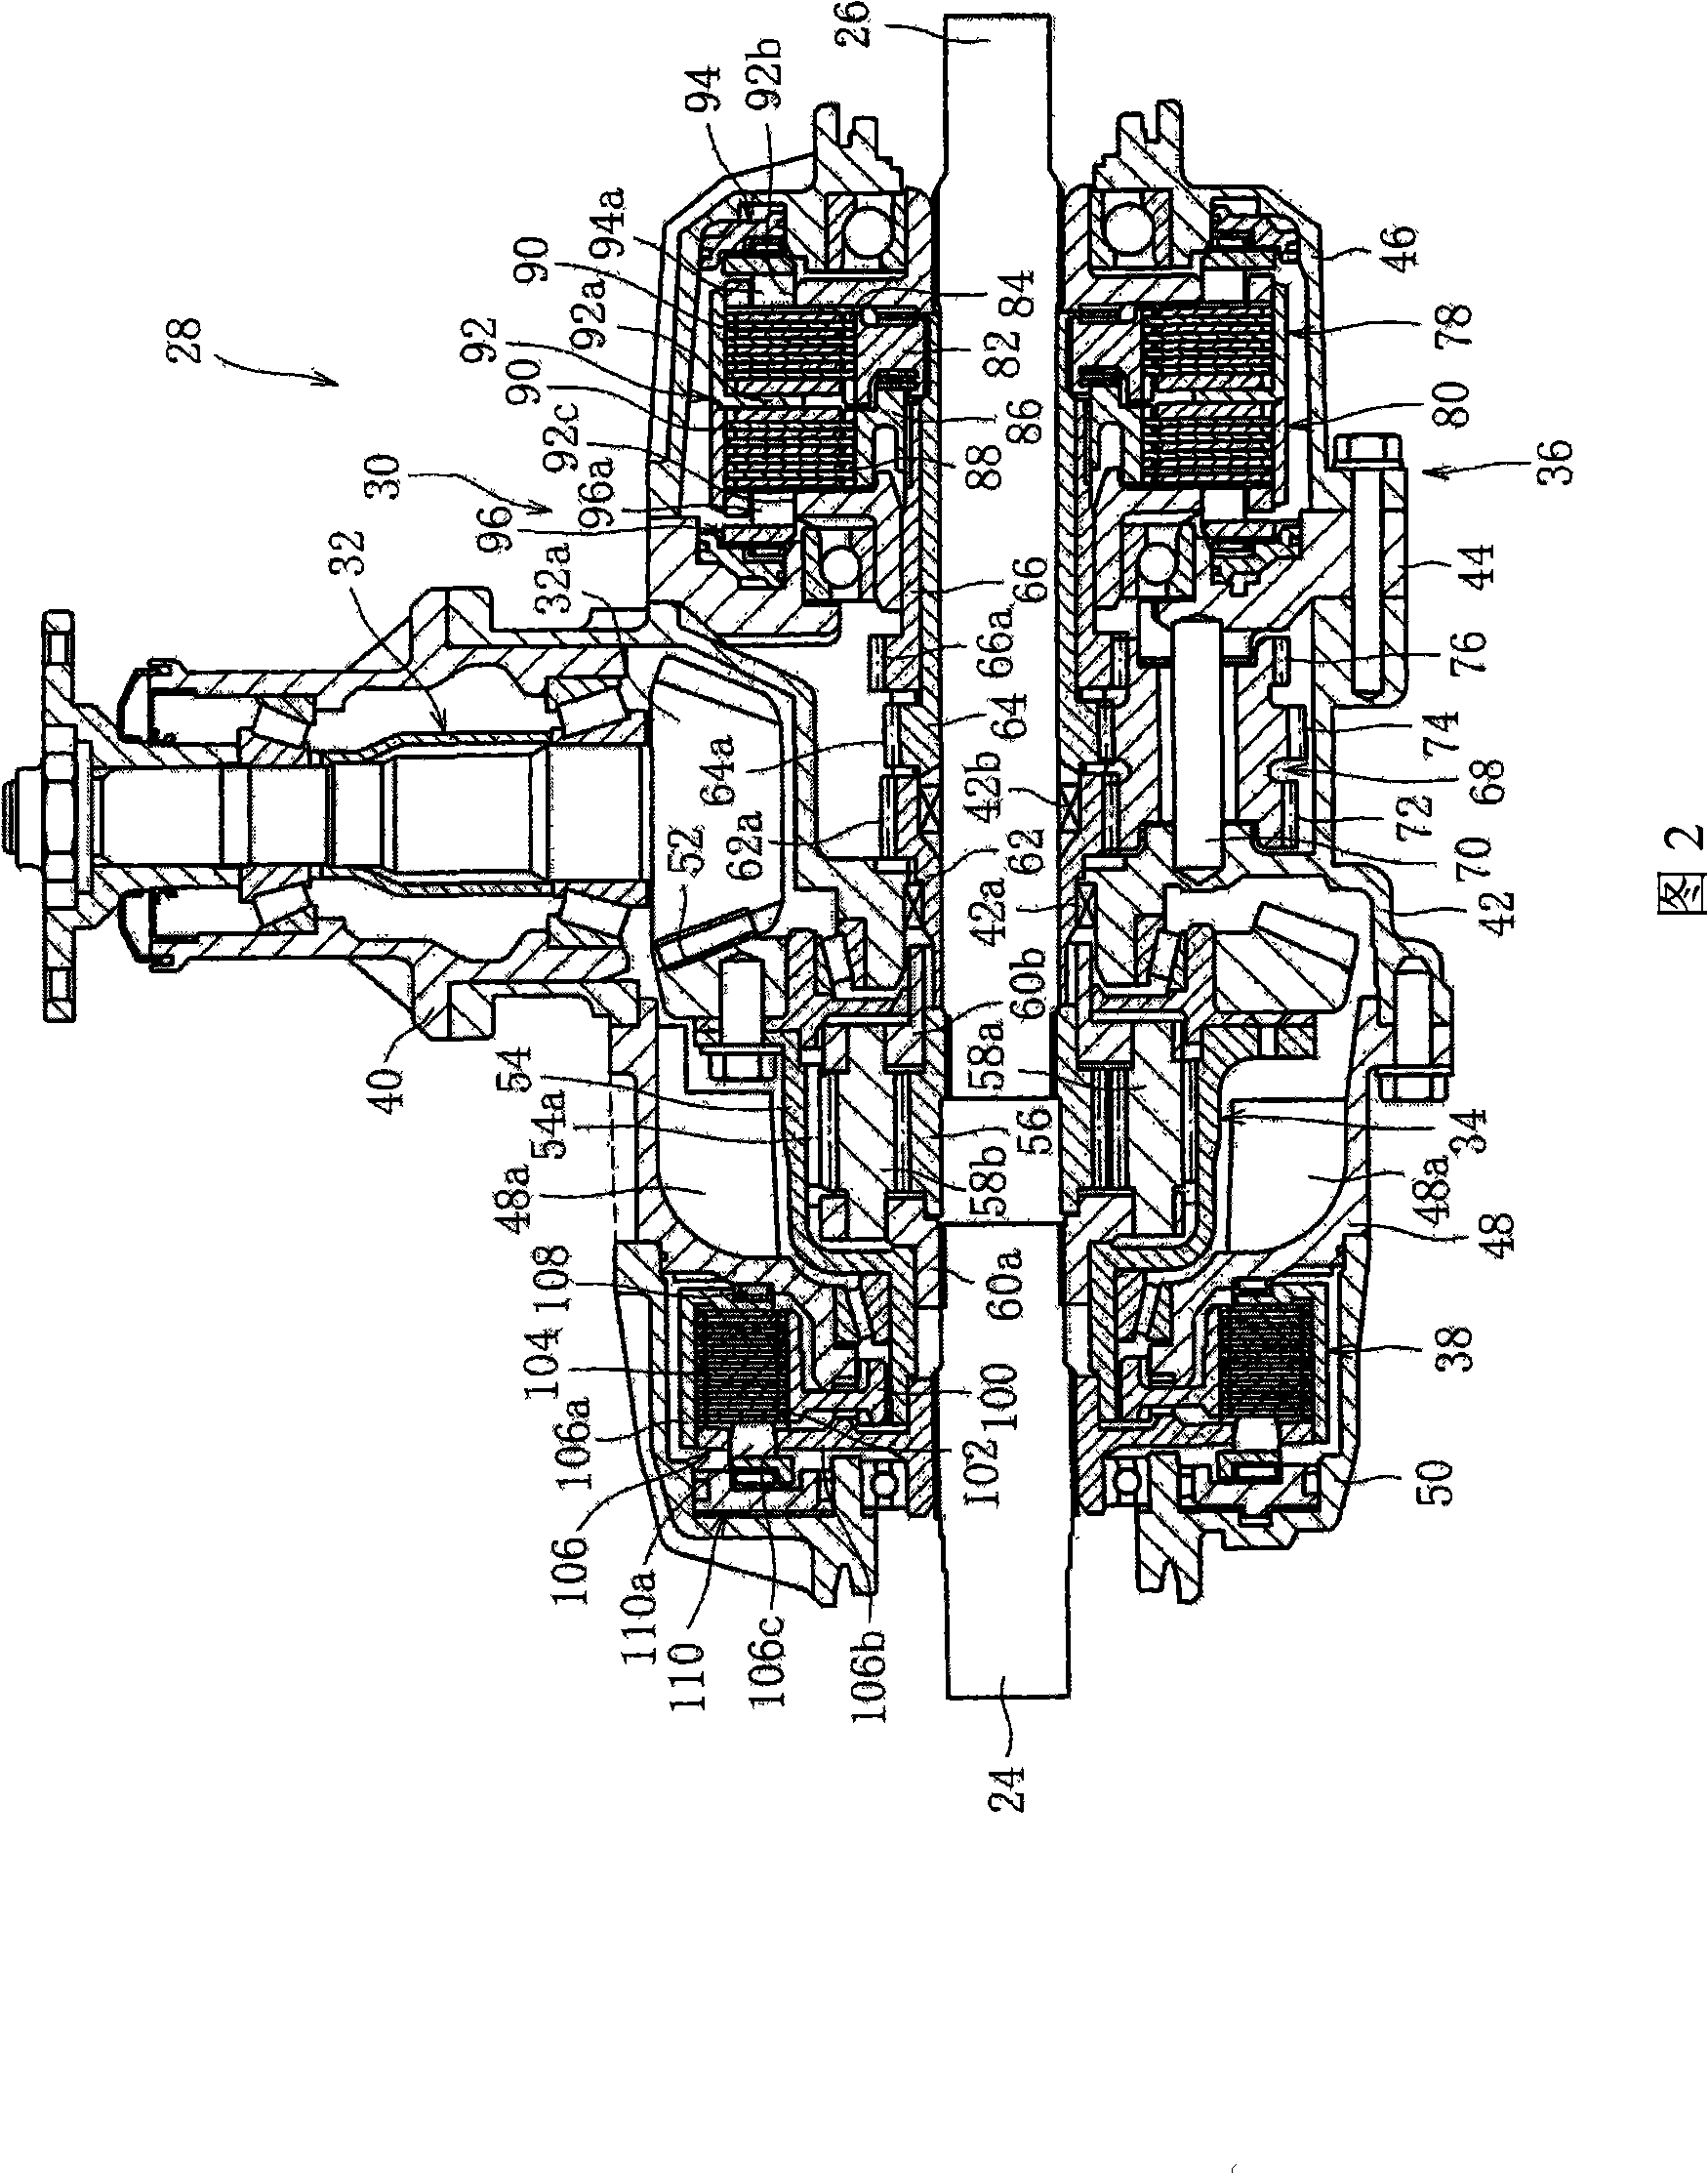 Device operable to distribute driving forces